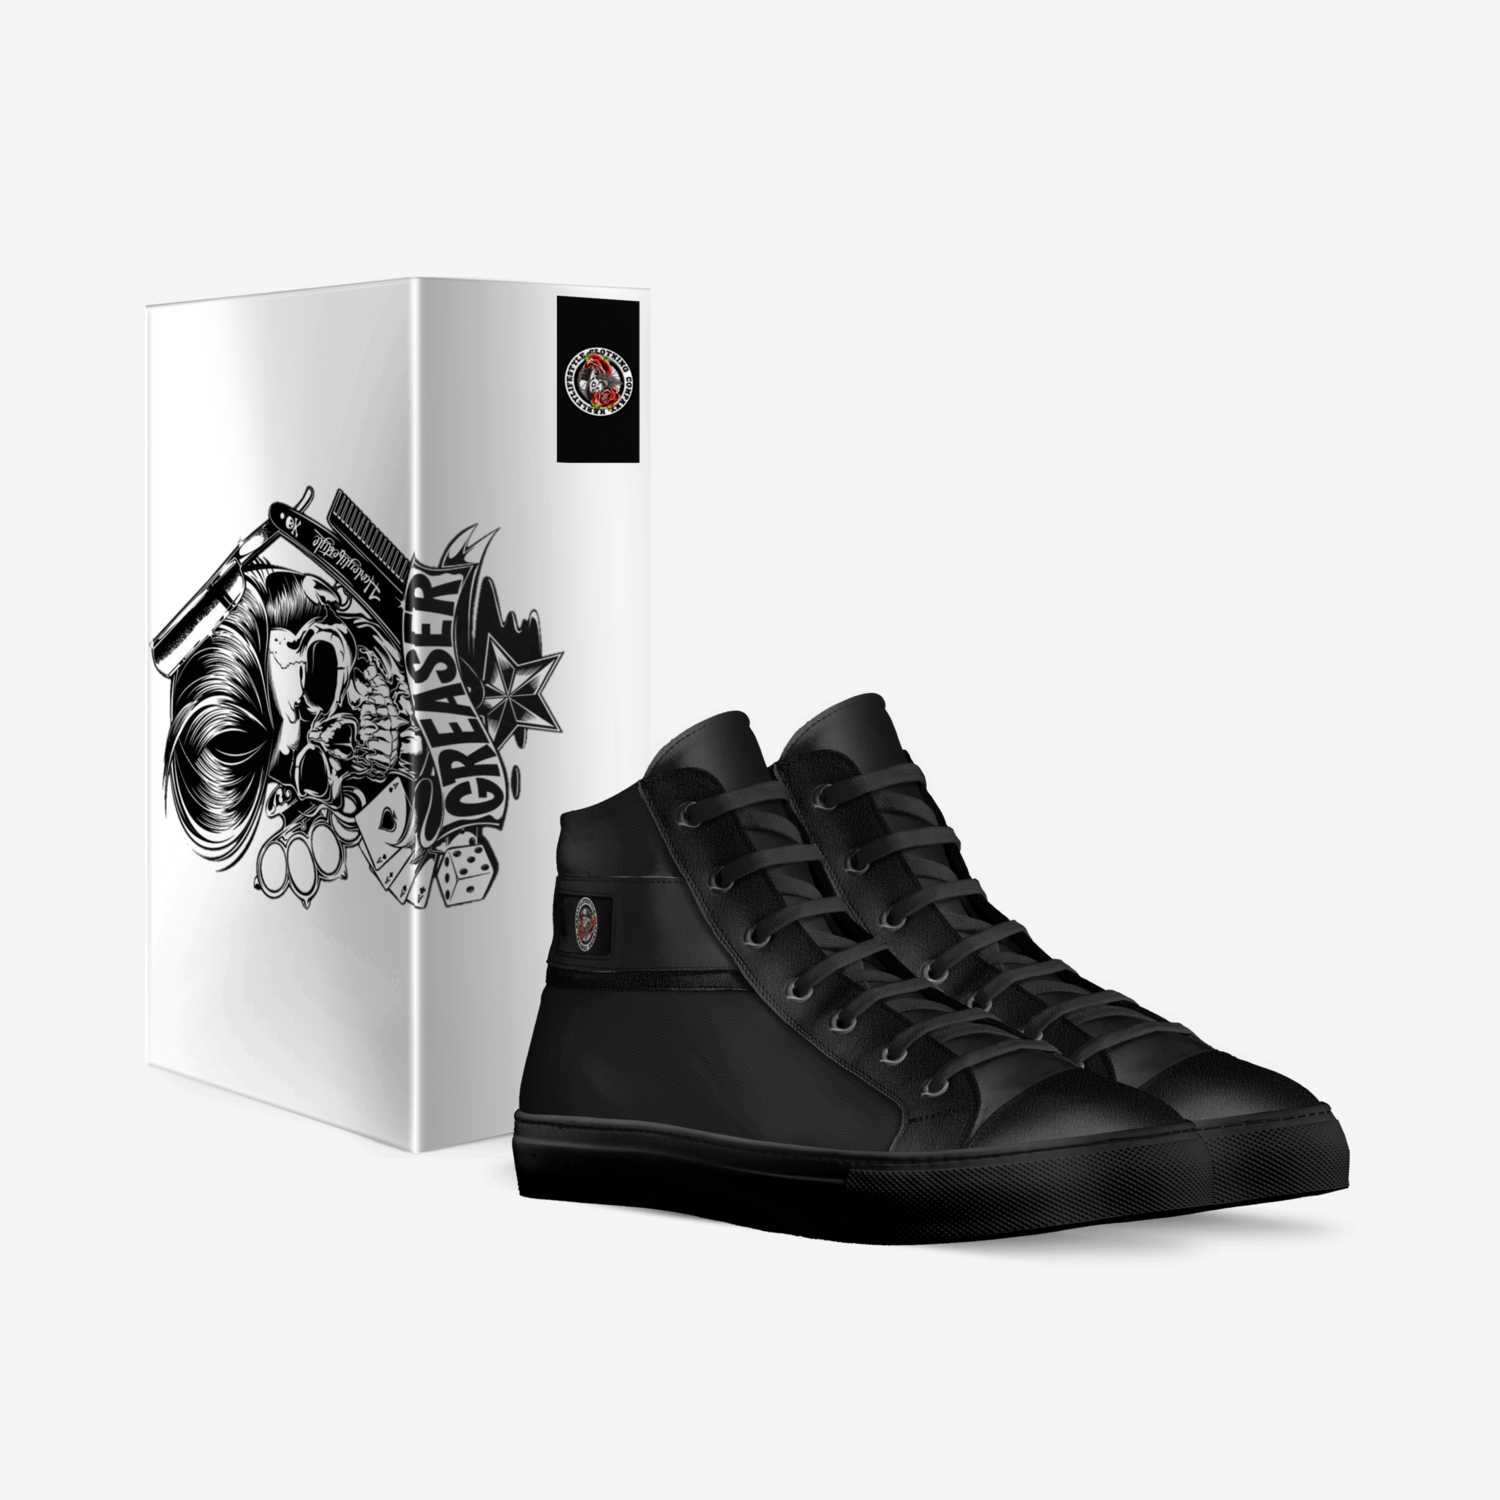 HarleyLifestyle6 custom made in Italy shoes by Shawn Barrickman | Box view